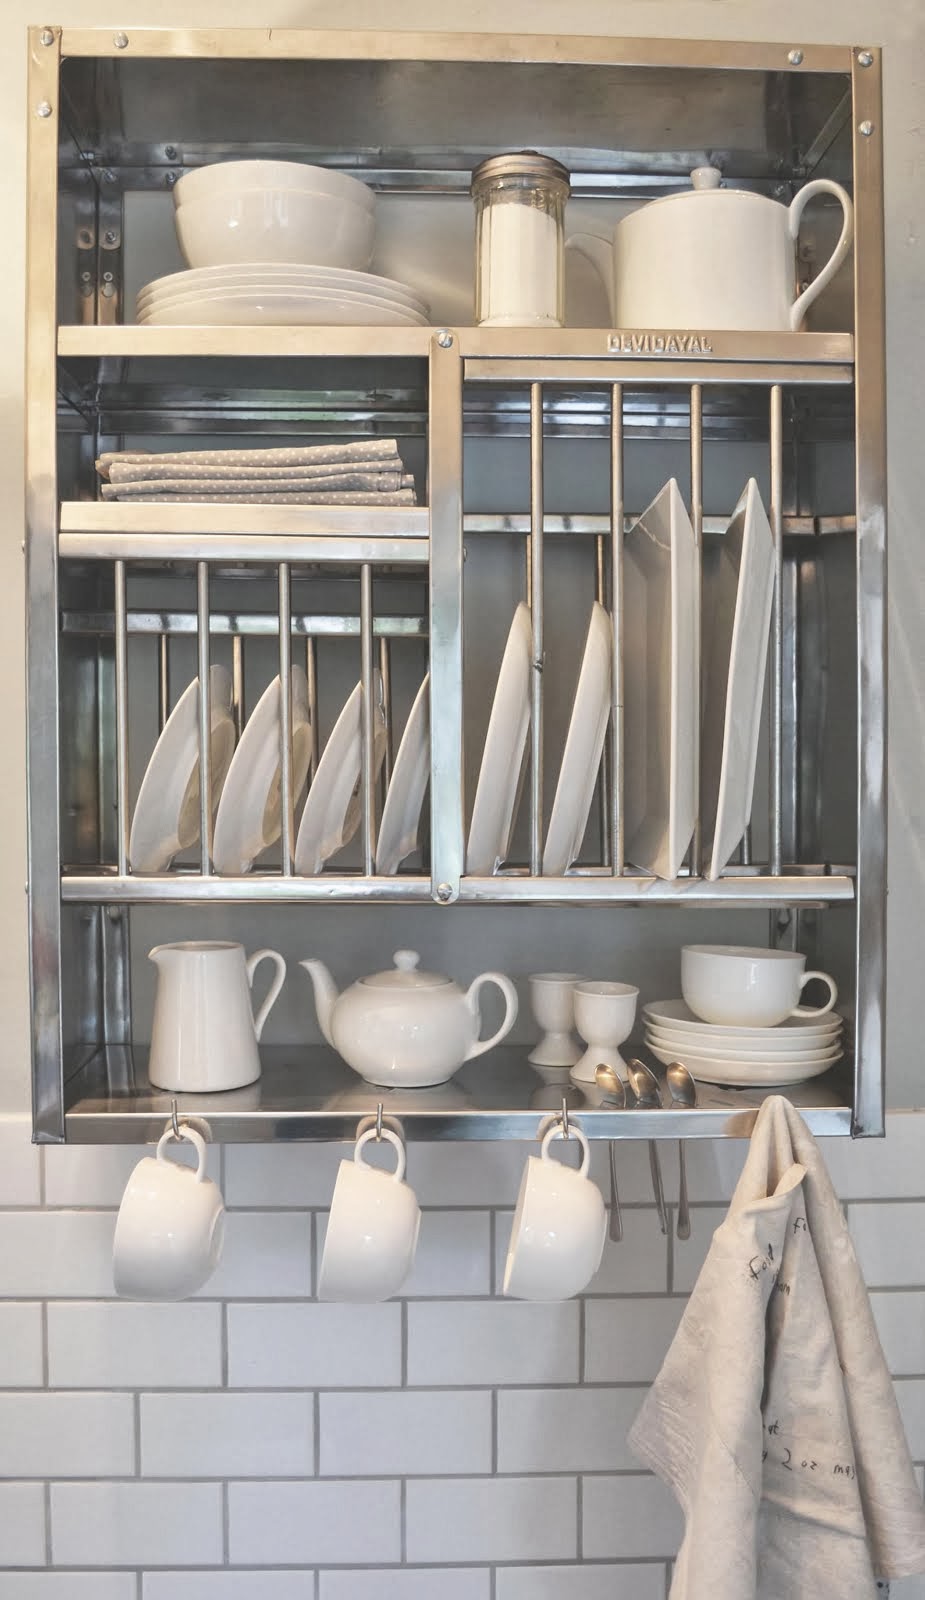 The Plate Rack